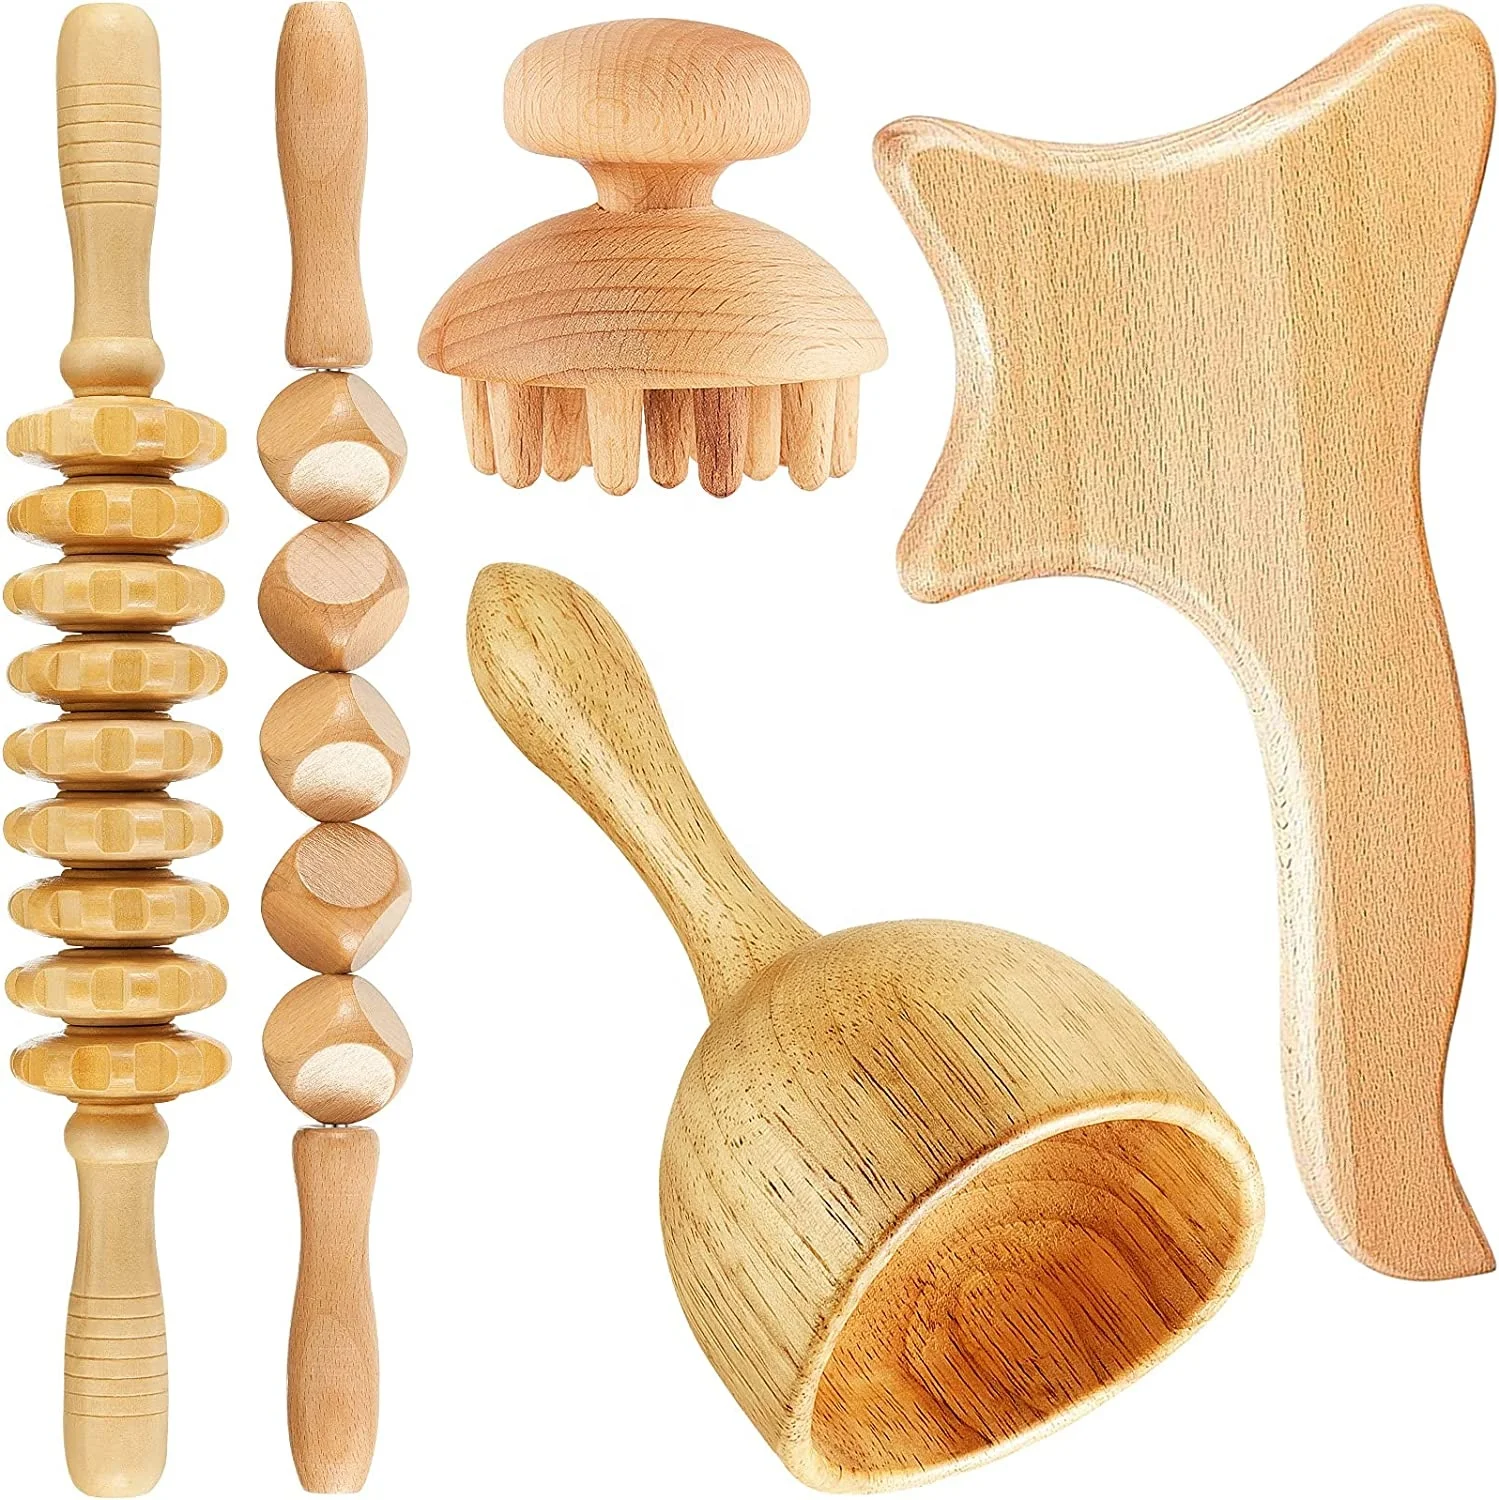 

5 Pieces of Wood Massage Stick Wood Roller Lymphatic Drainage Massager kit Wood Therapy Massage Tools